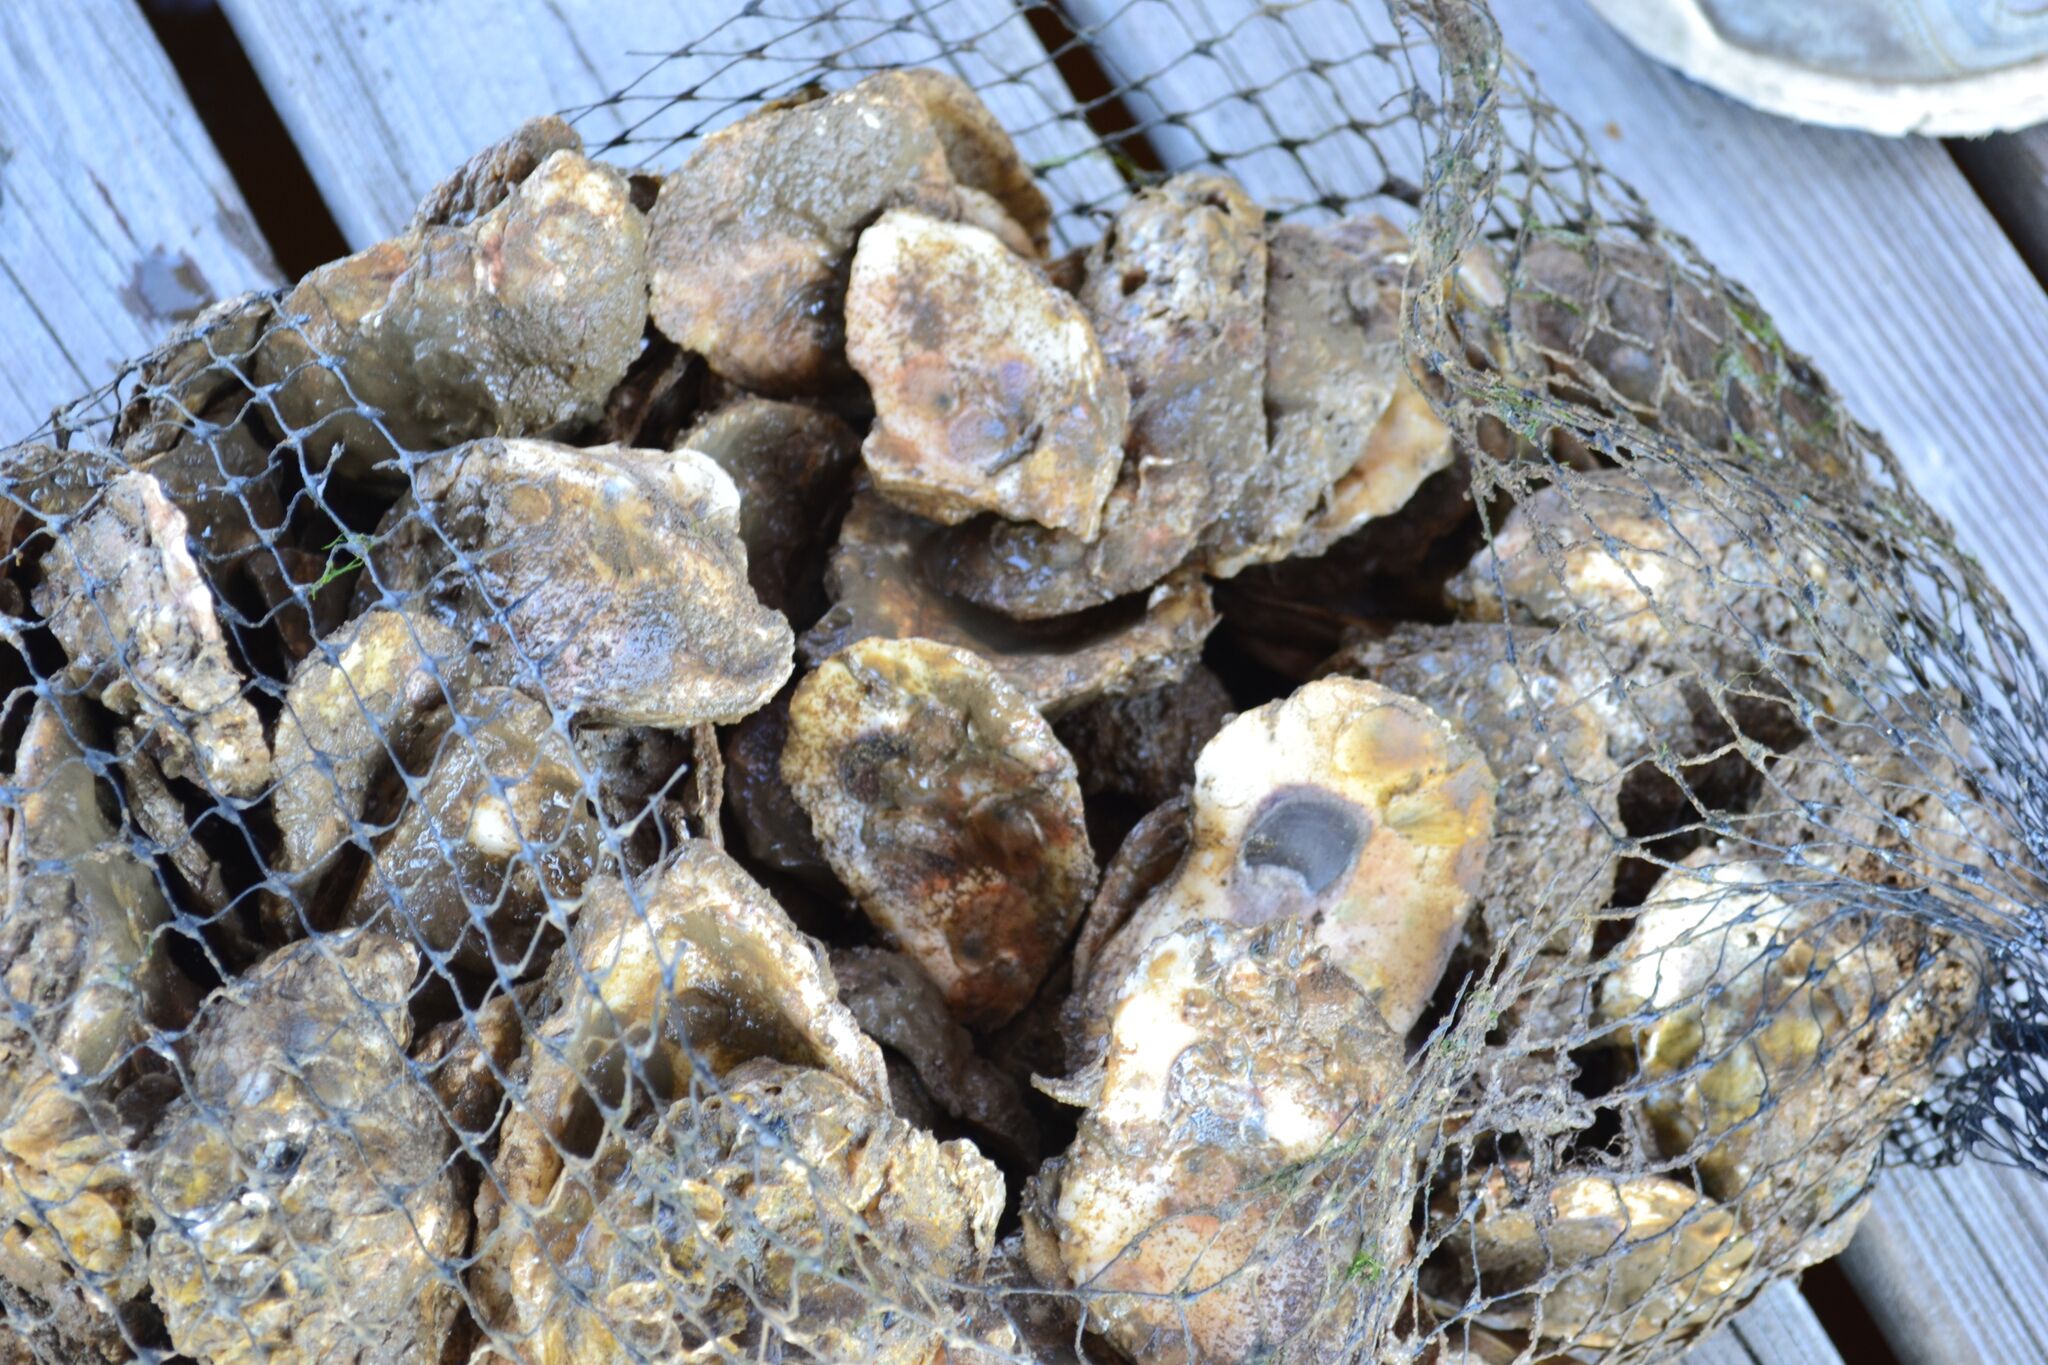 Raw oysters are alive when you eat them, but do they feel pain? 